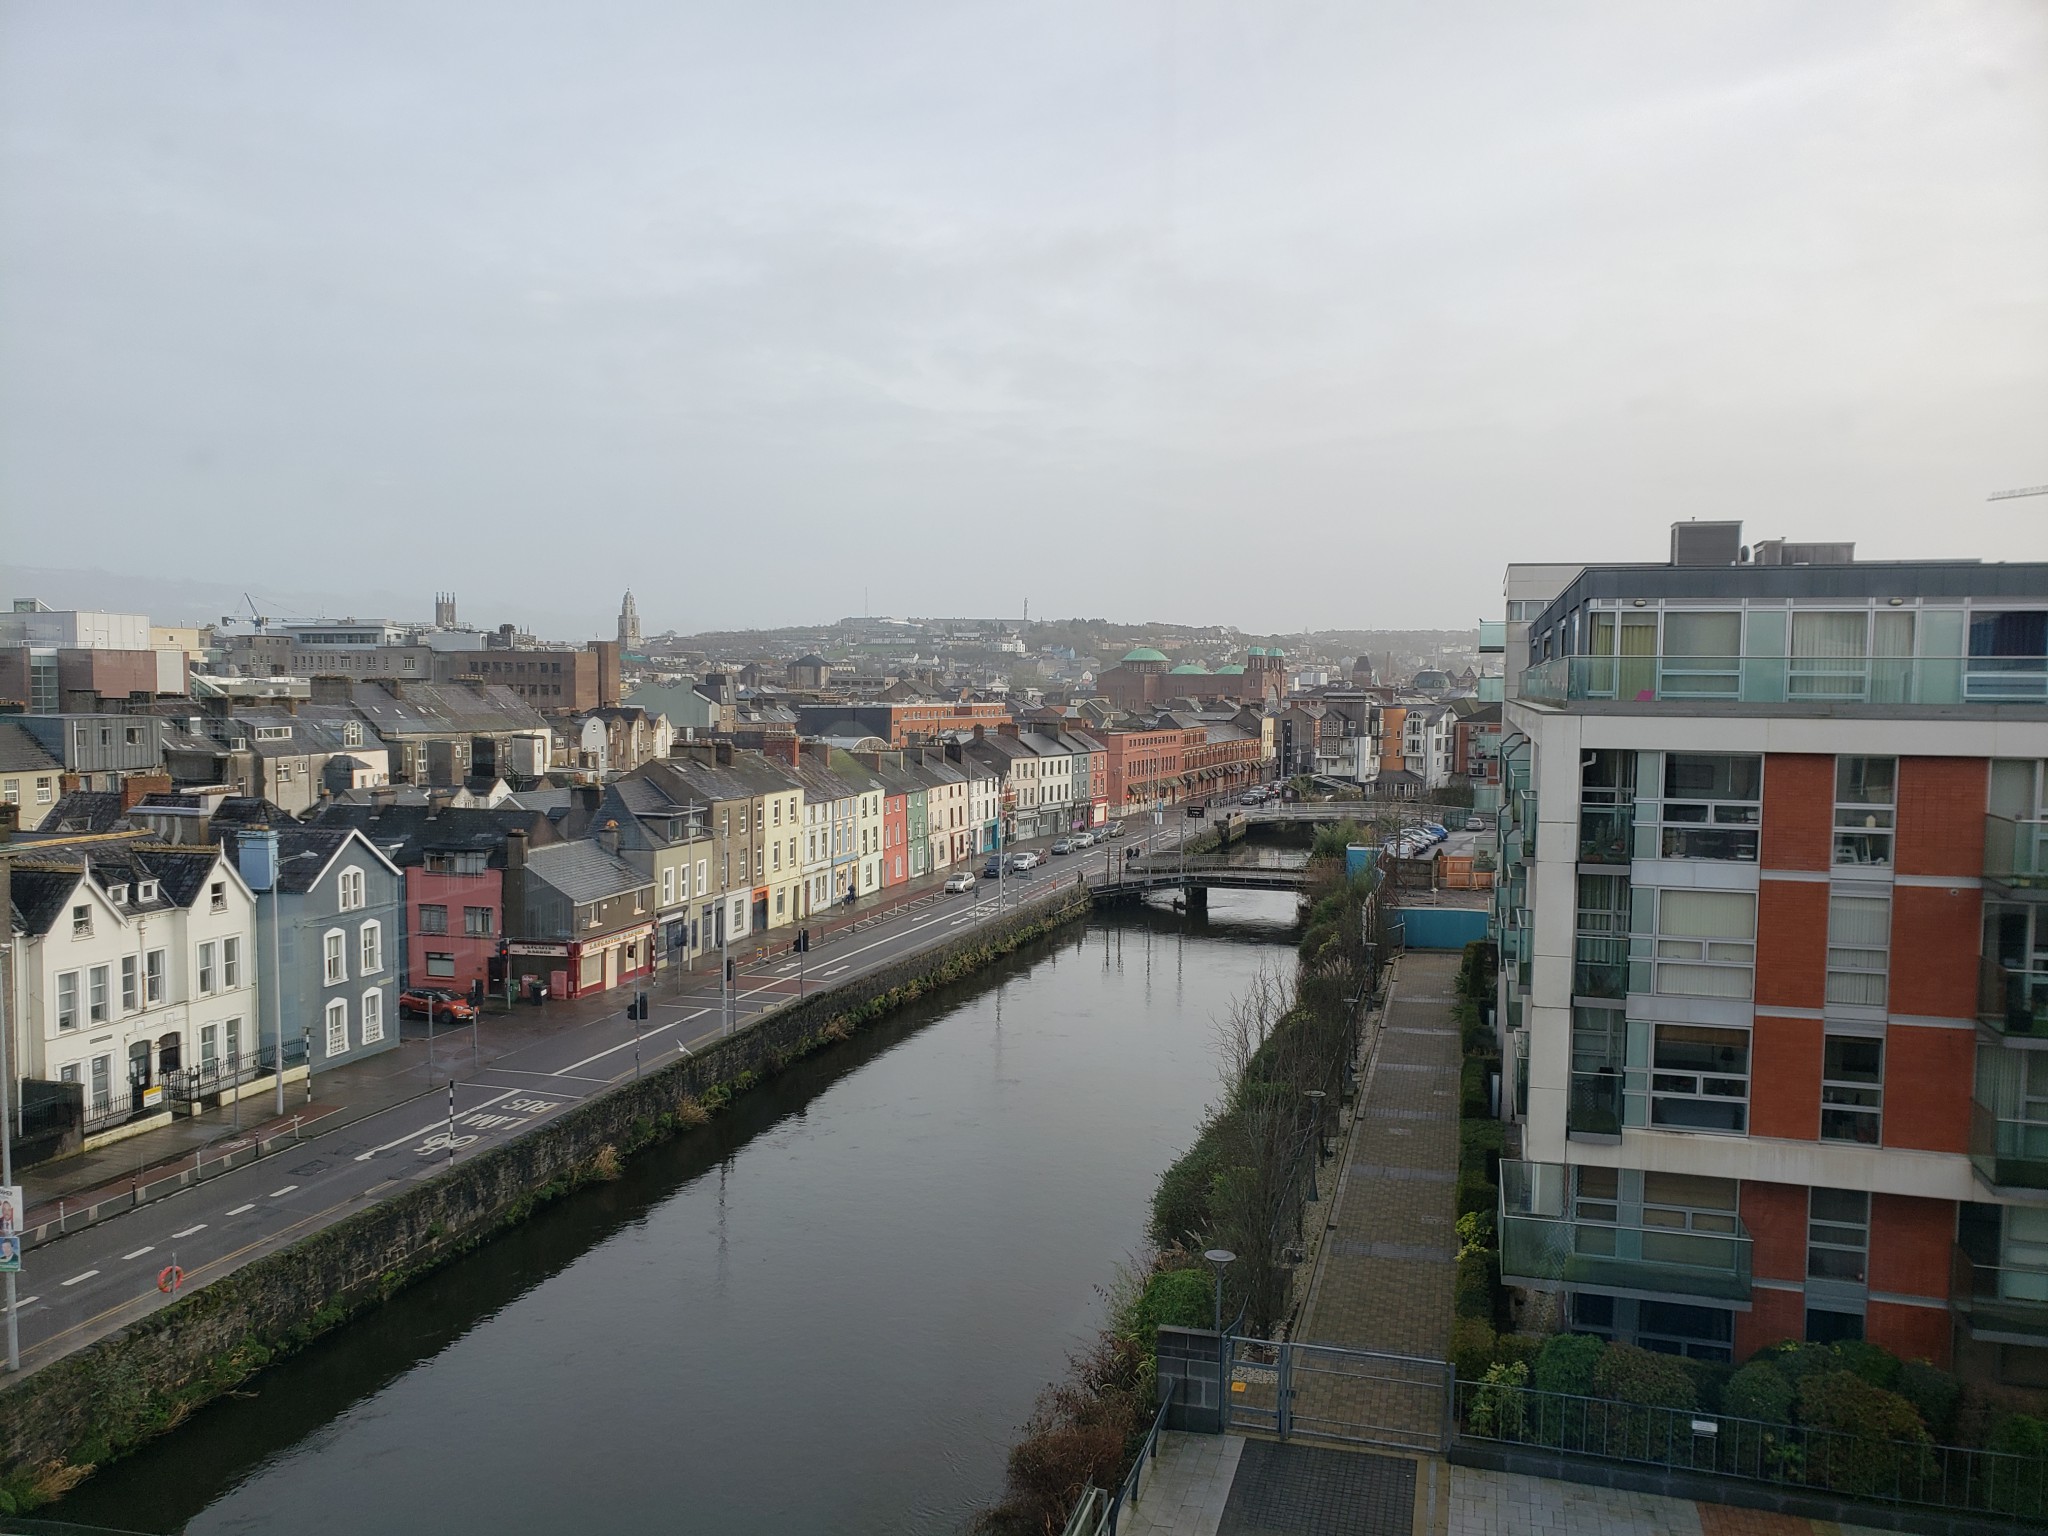 Cork Day 2 – 2/1/2020 – Heathrow, Perfectionist's Cafe, and Cork